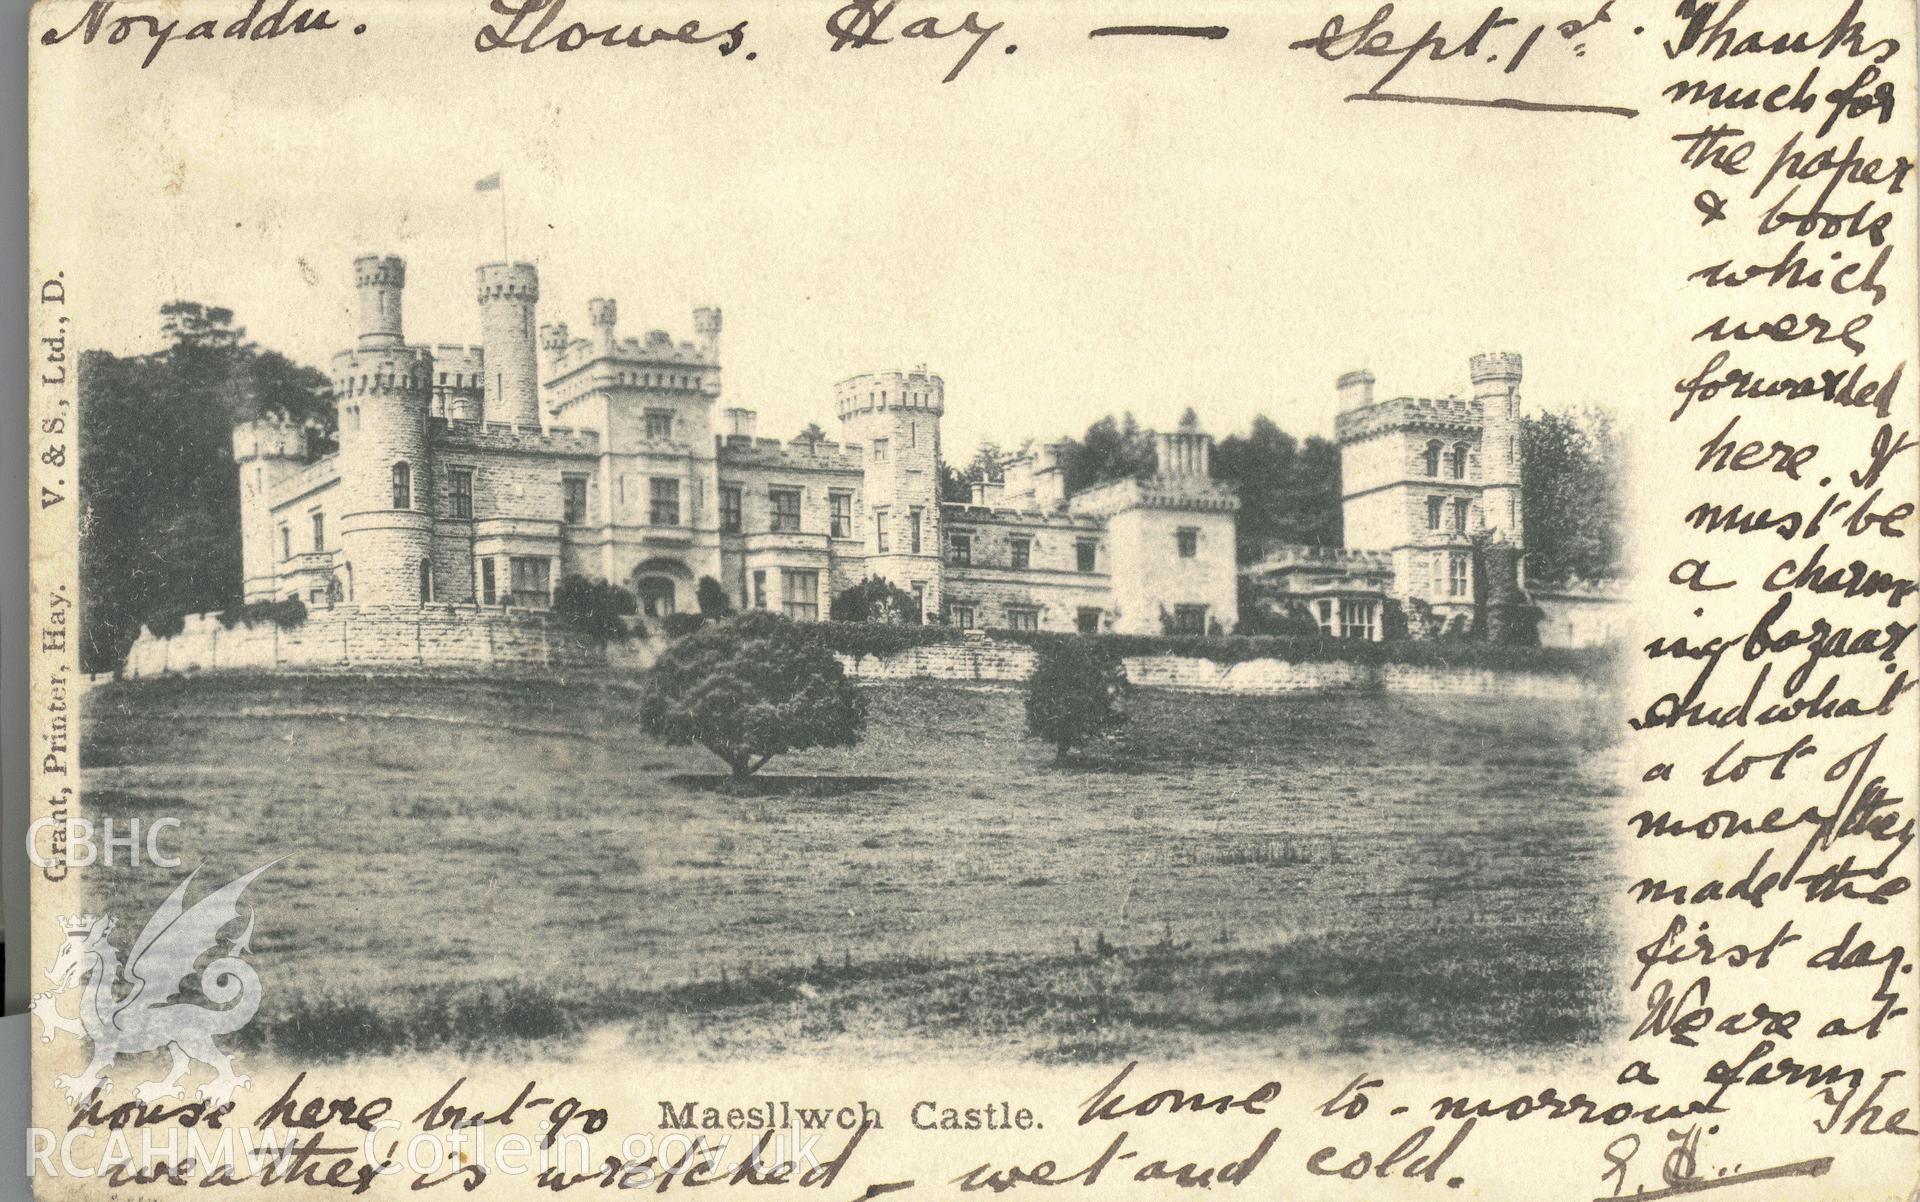 Digitised postcard image of Maesllwch Castle, Grant, Stationer, Hay. Produced by Parks and Gardens Data Services, from an original item in the Peter Davis Collection at Parks and Gardens UK. We hold only web-resolution images of this collection, suitable for viewing on screen and for research purposes only. We do not hold the original images, or publication quality scans.